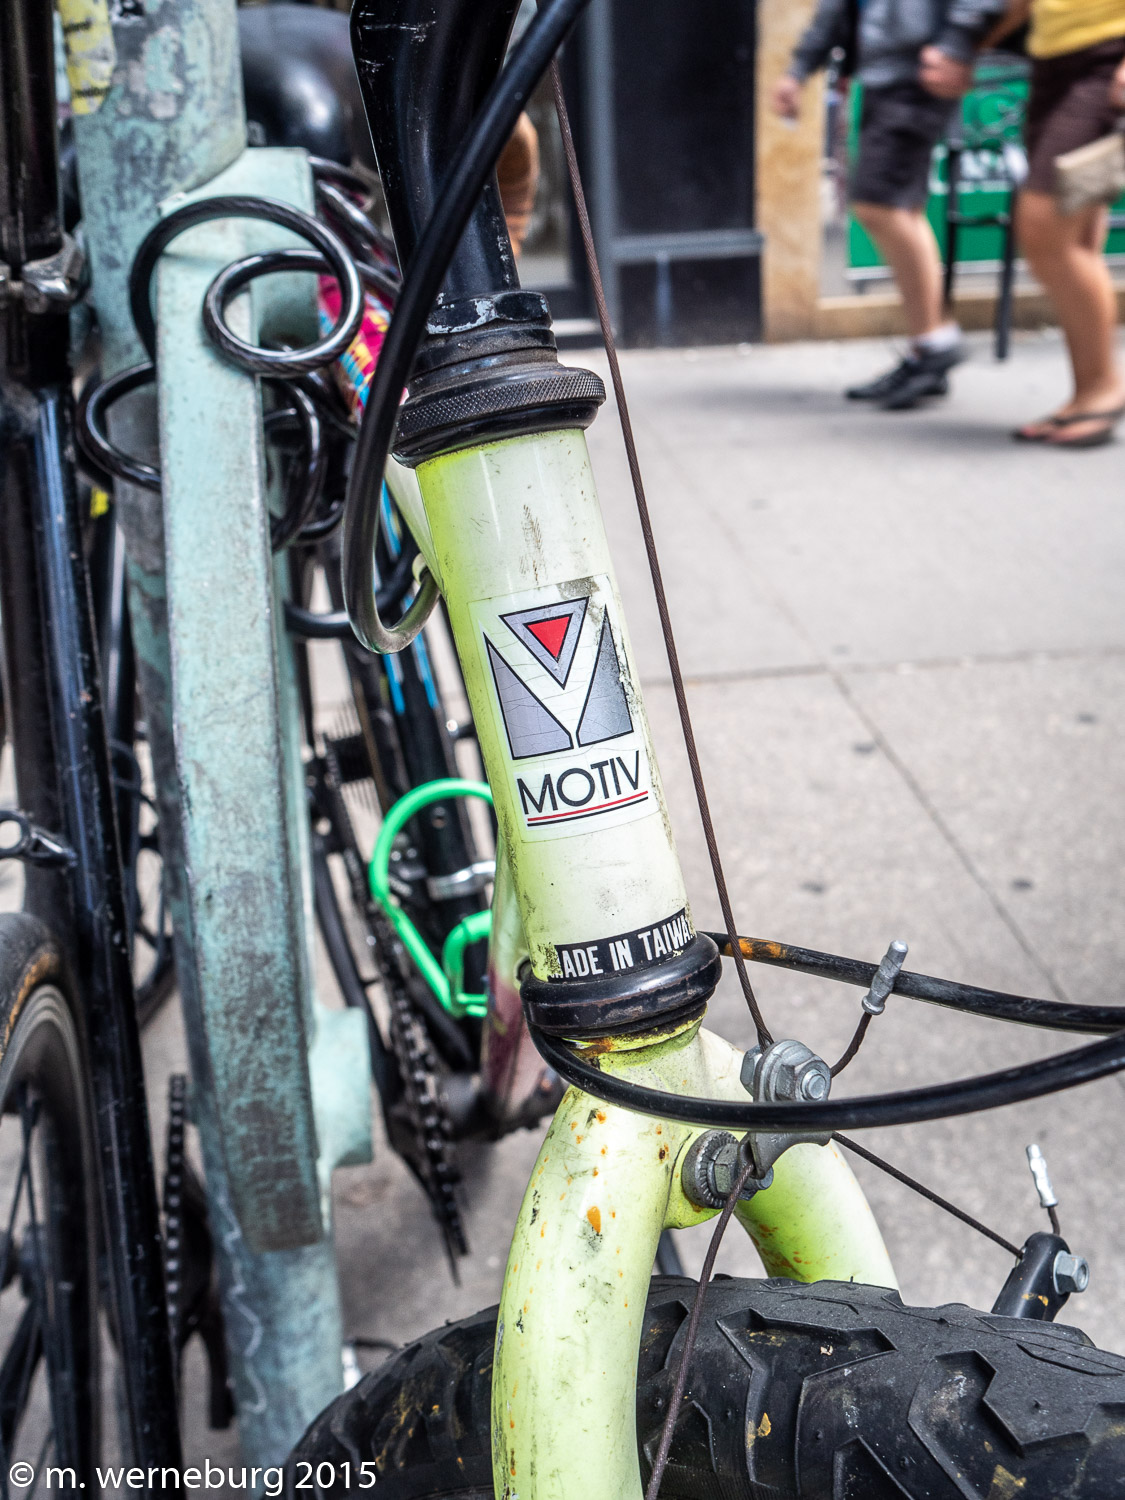 a motiv bicycle badge on the street